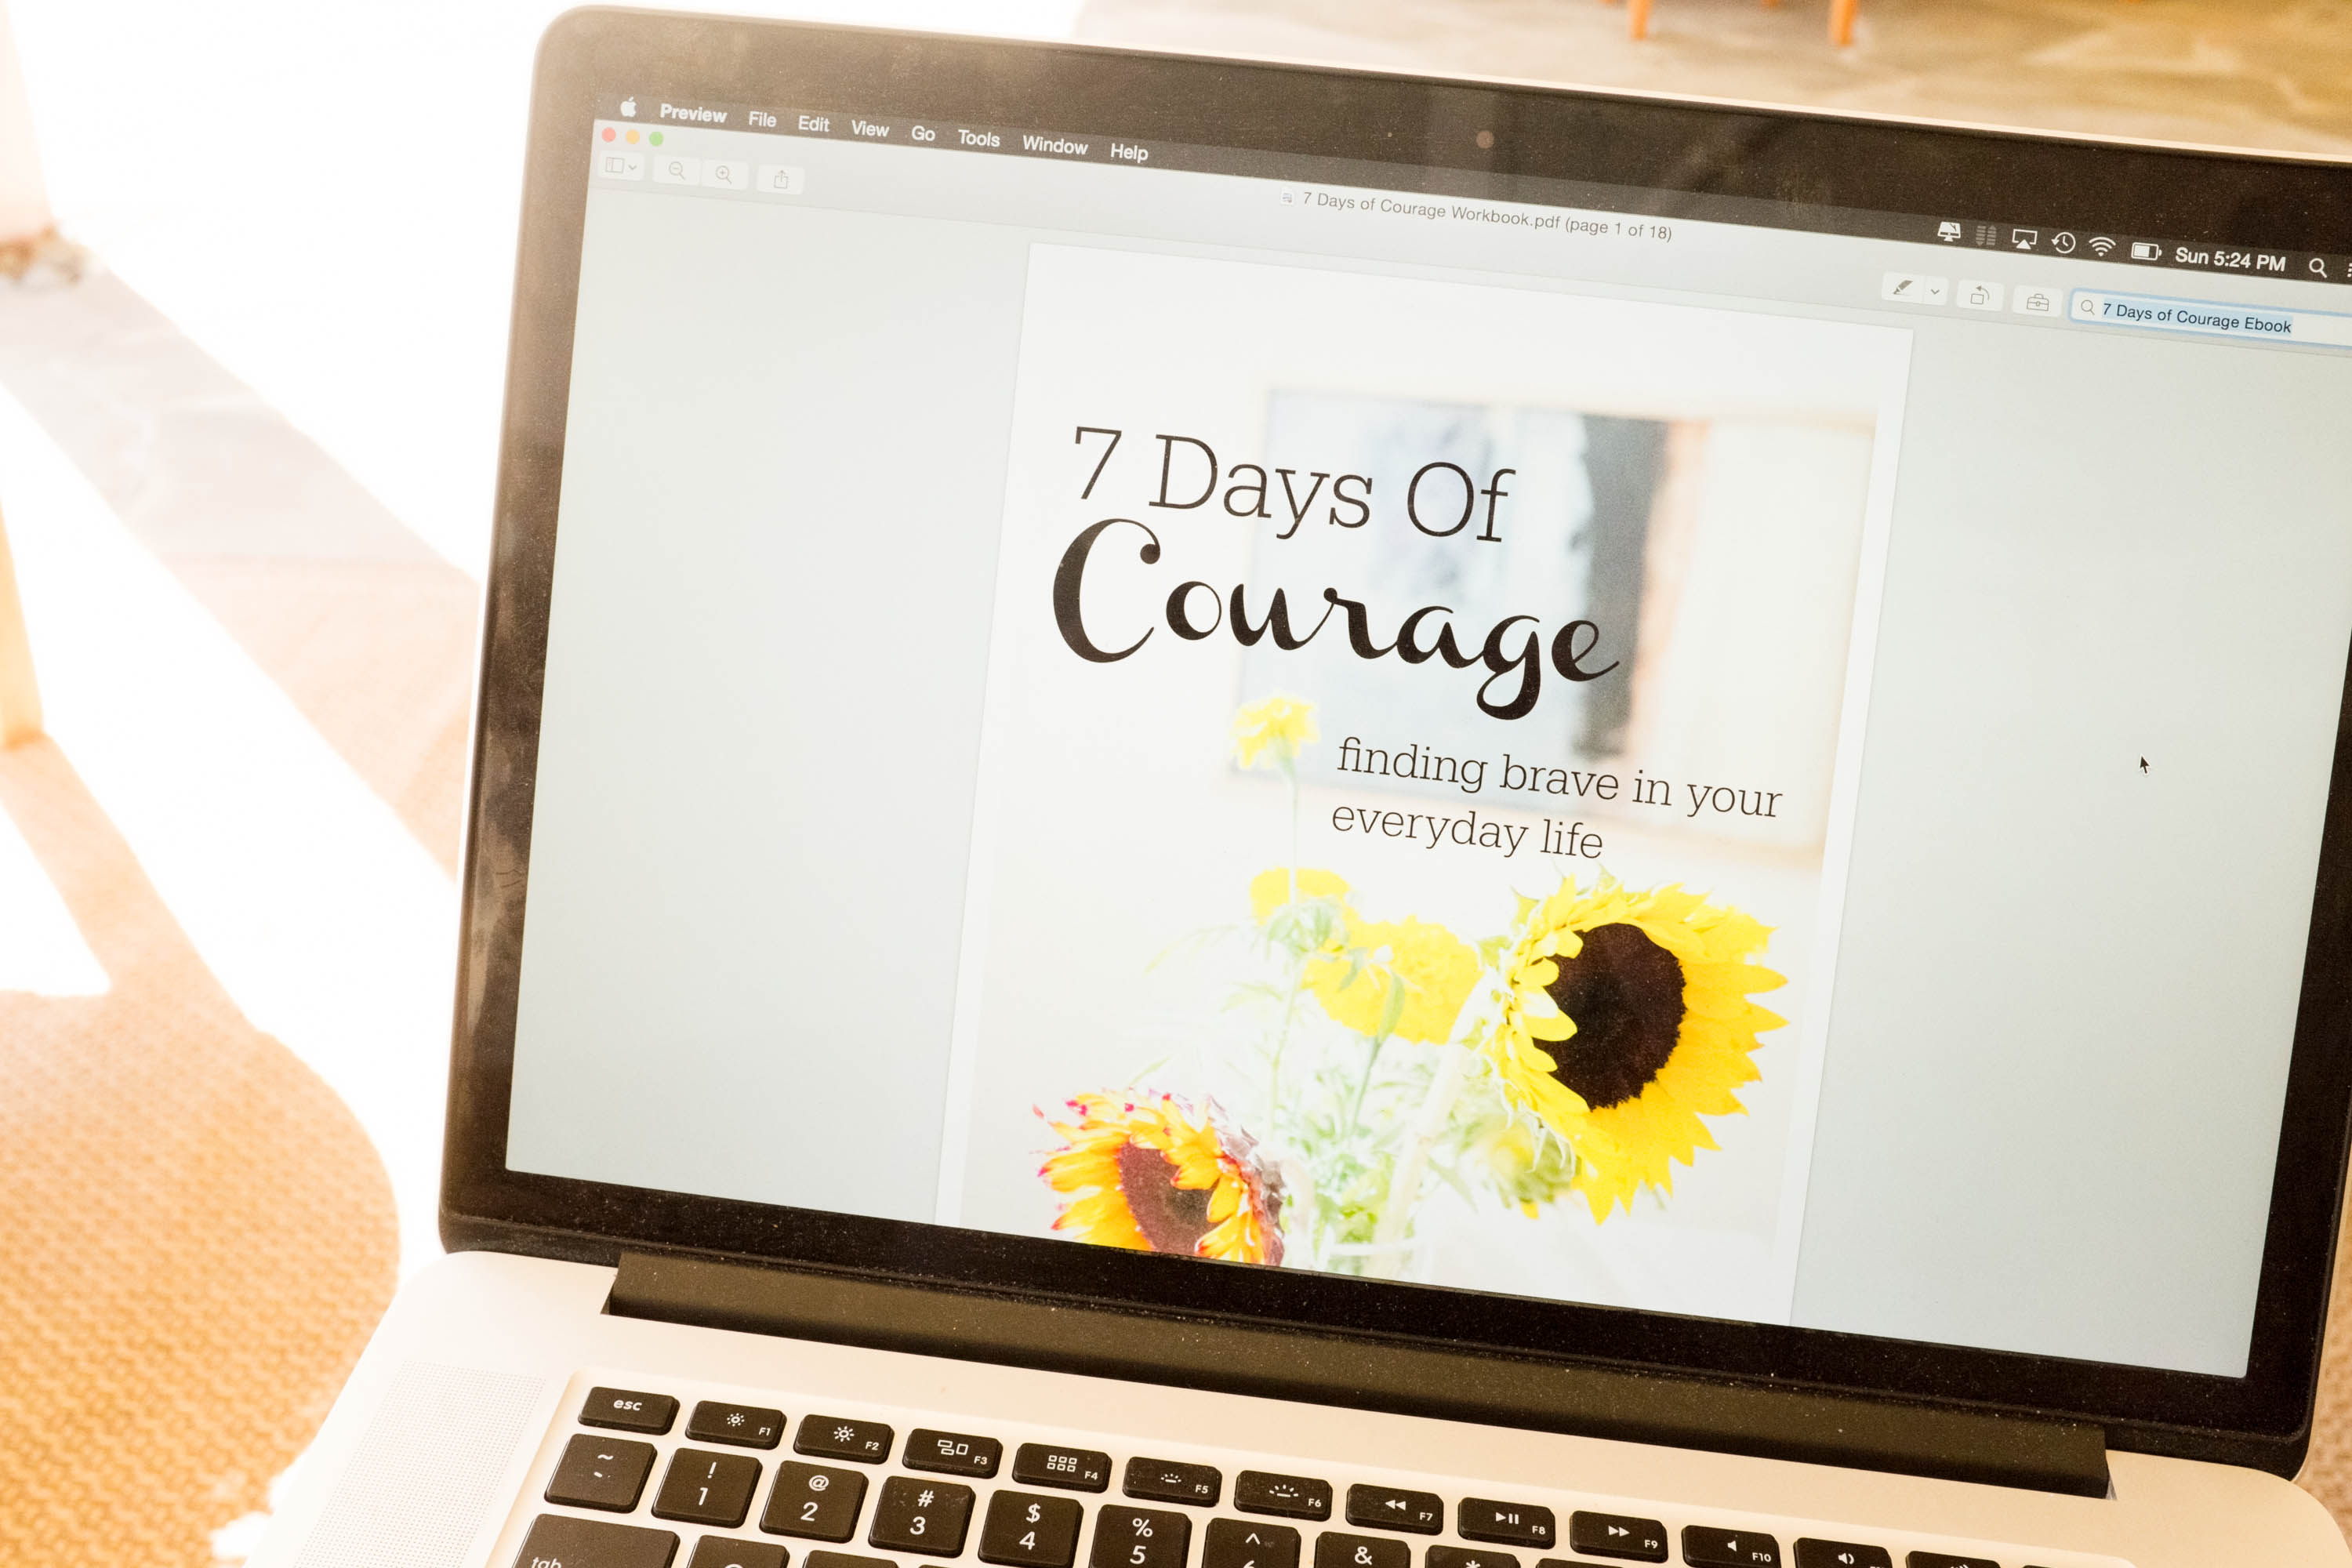 7 Days of Courage: The Story Behind My New Ebook!